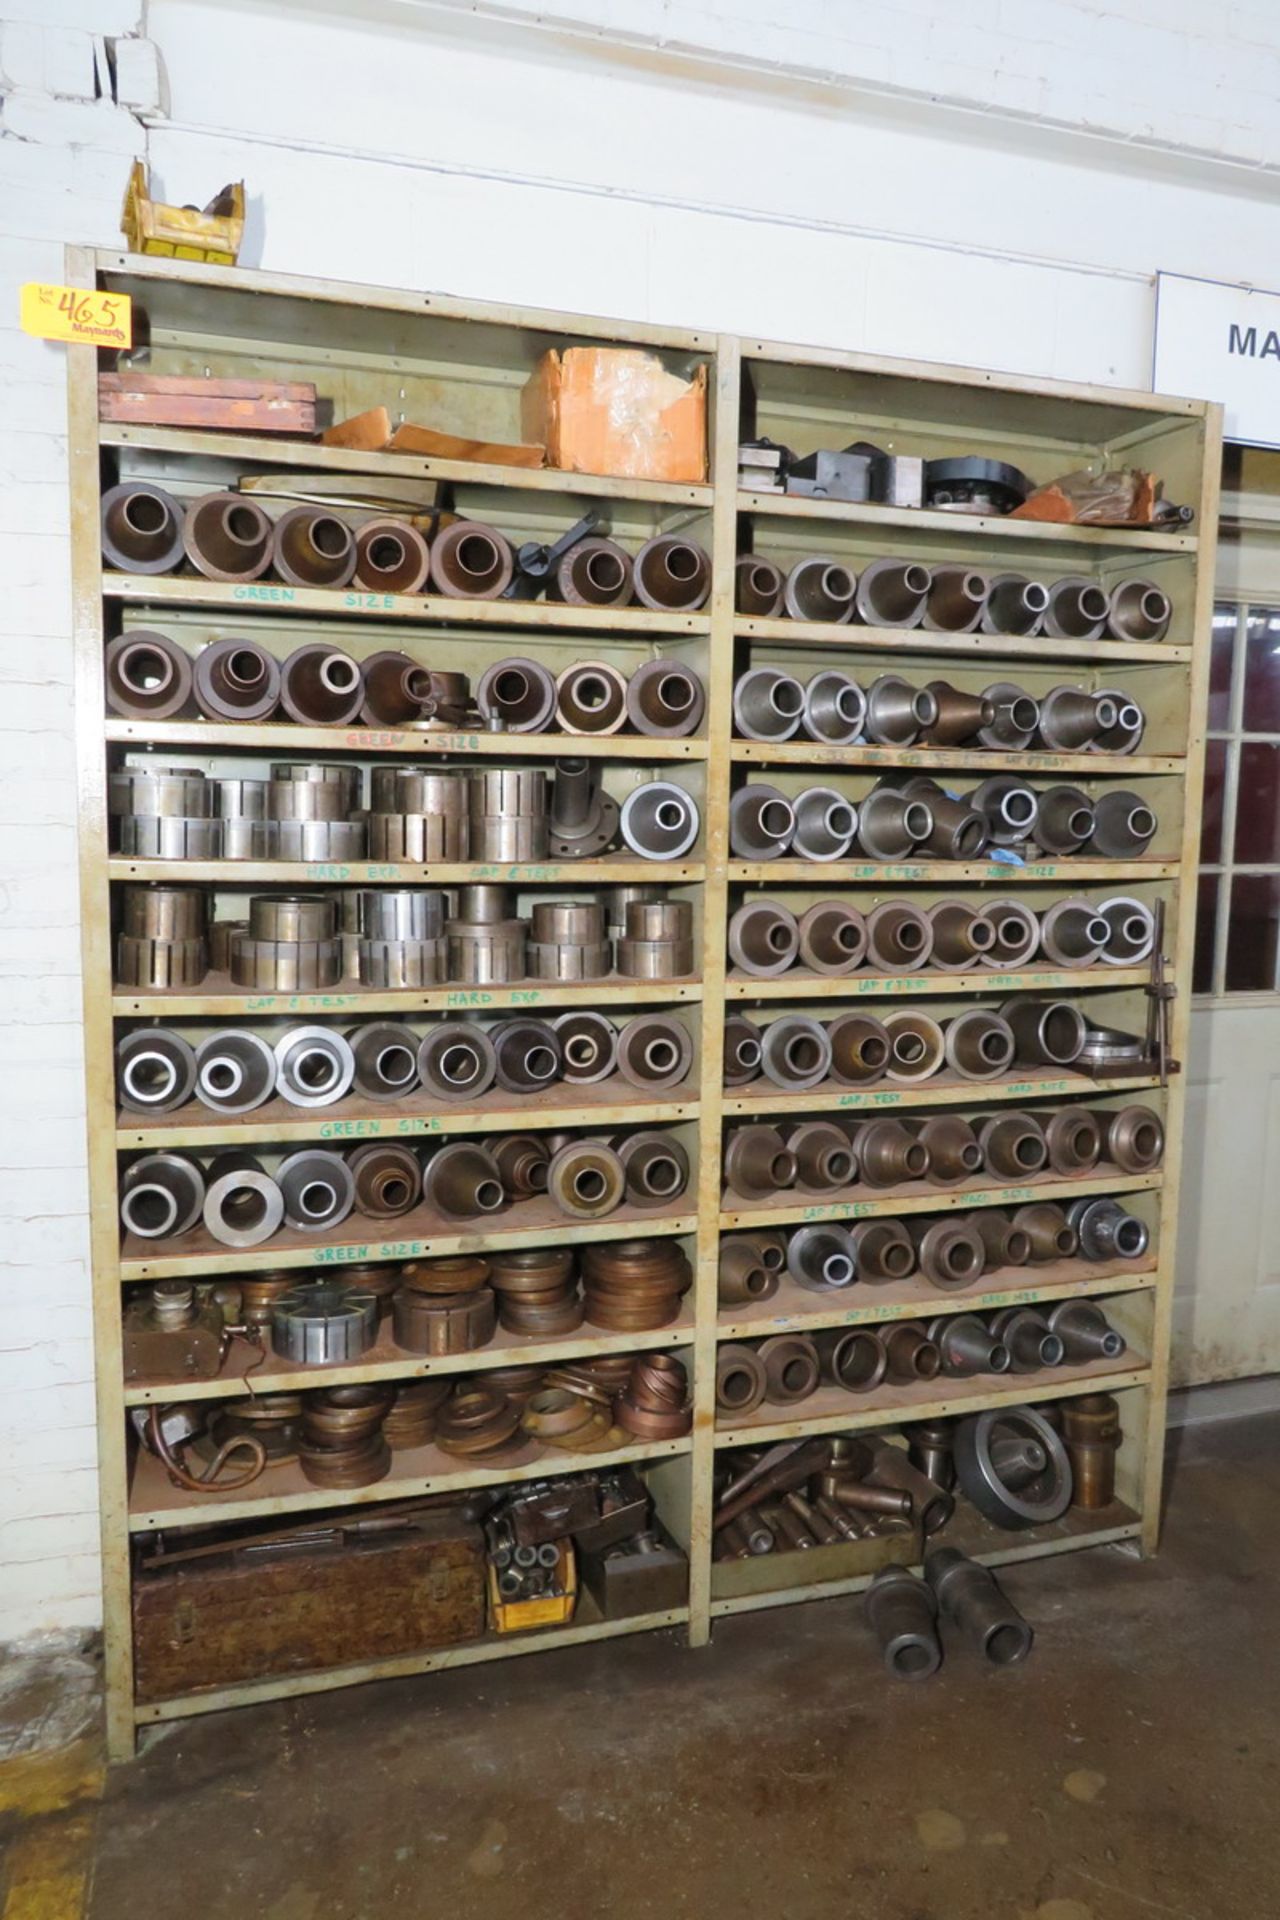 Shelving Unit with Large Assortment of Tooling